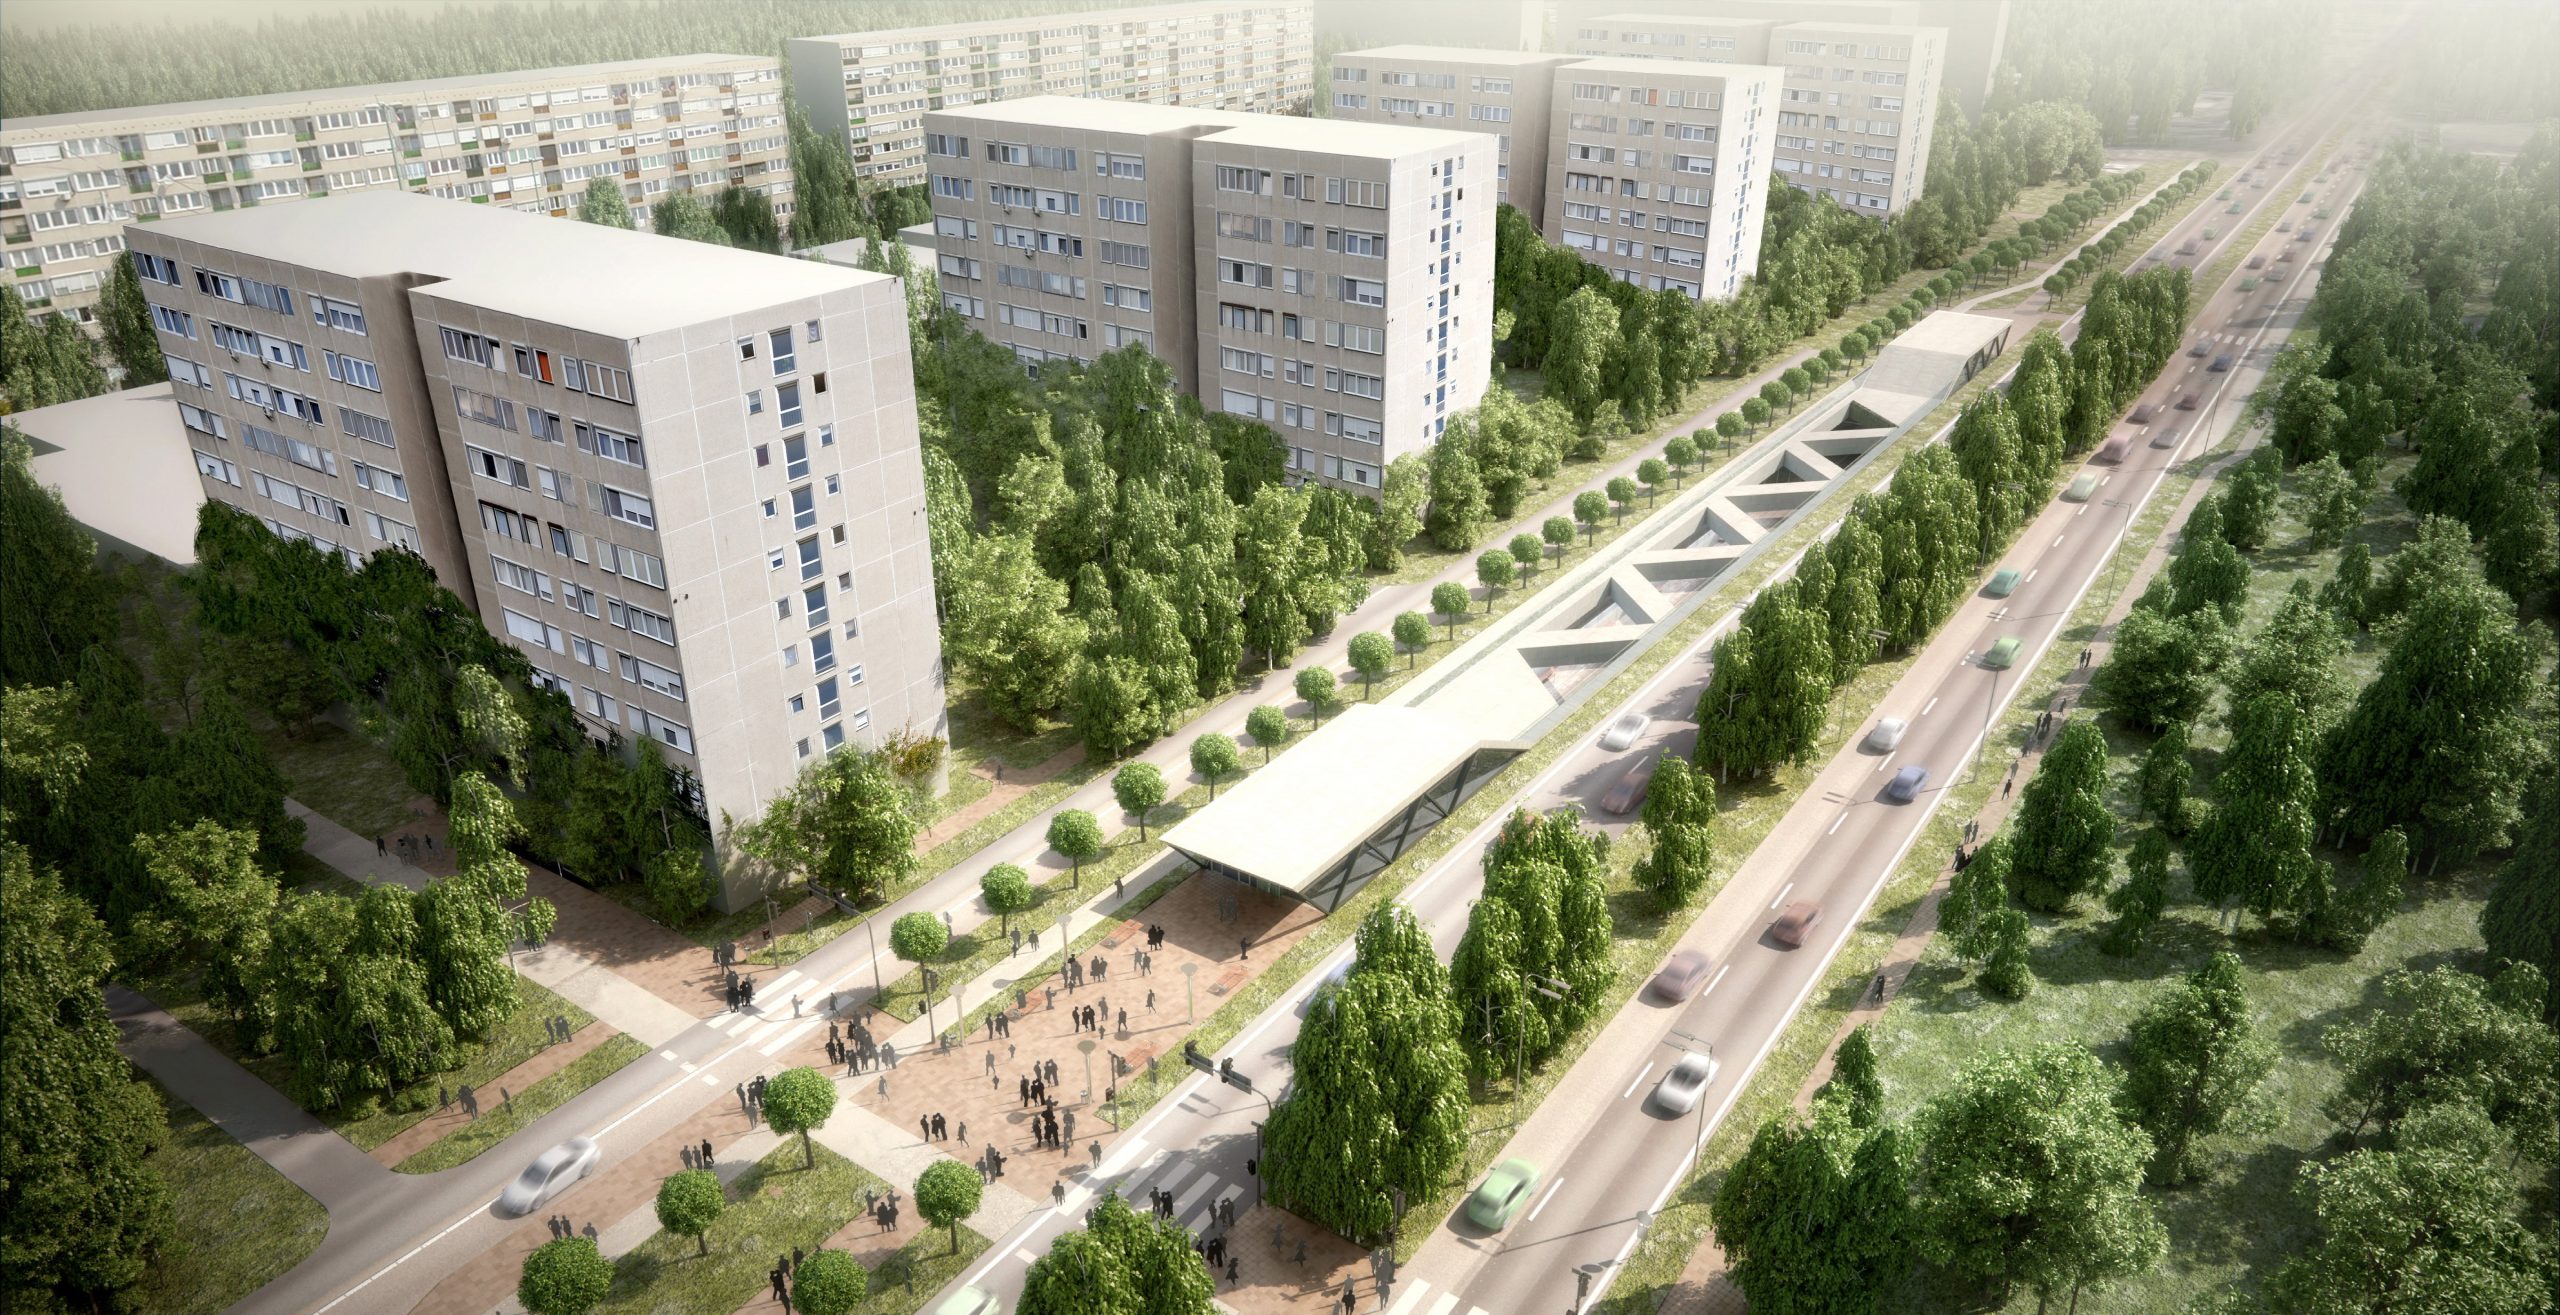 HUF 4.6 Bn Allocated to Connecting Budapest Metro, Suburban Rail